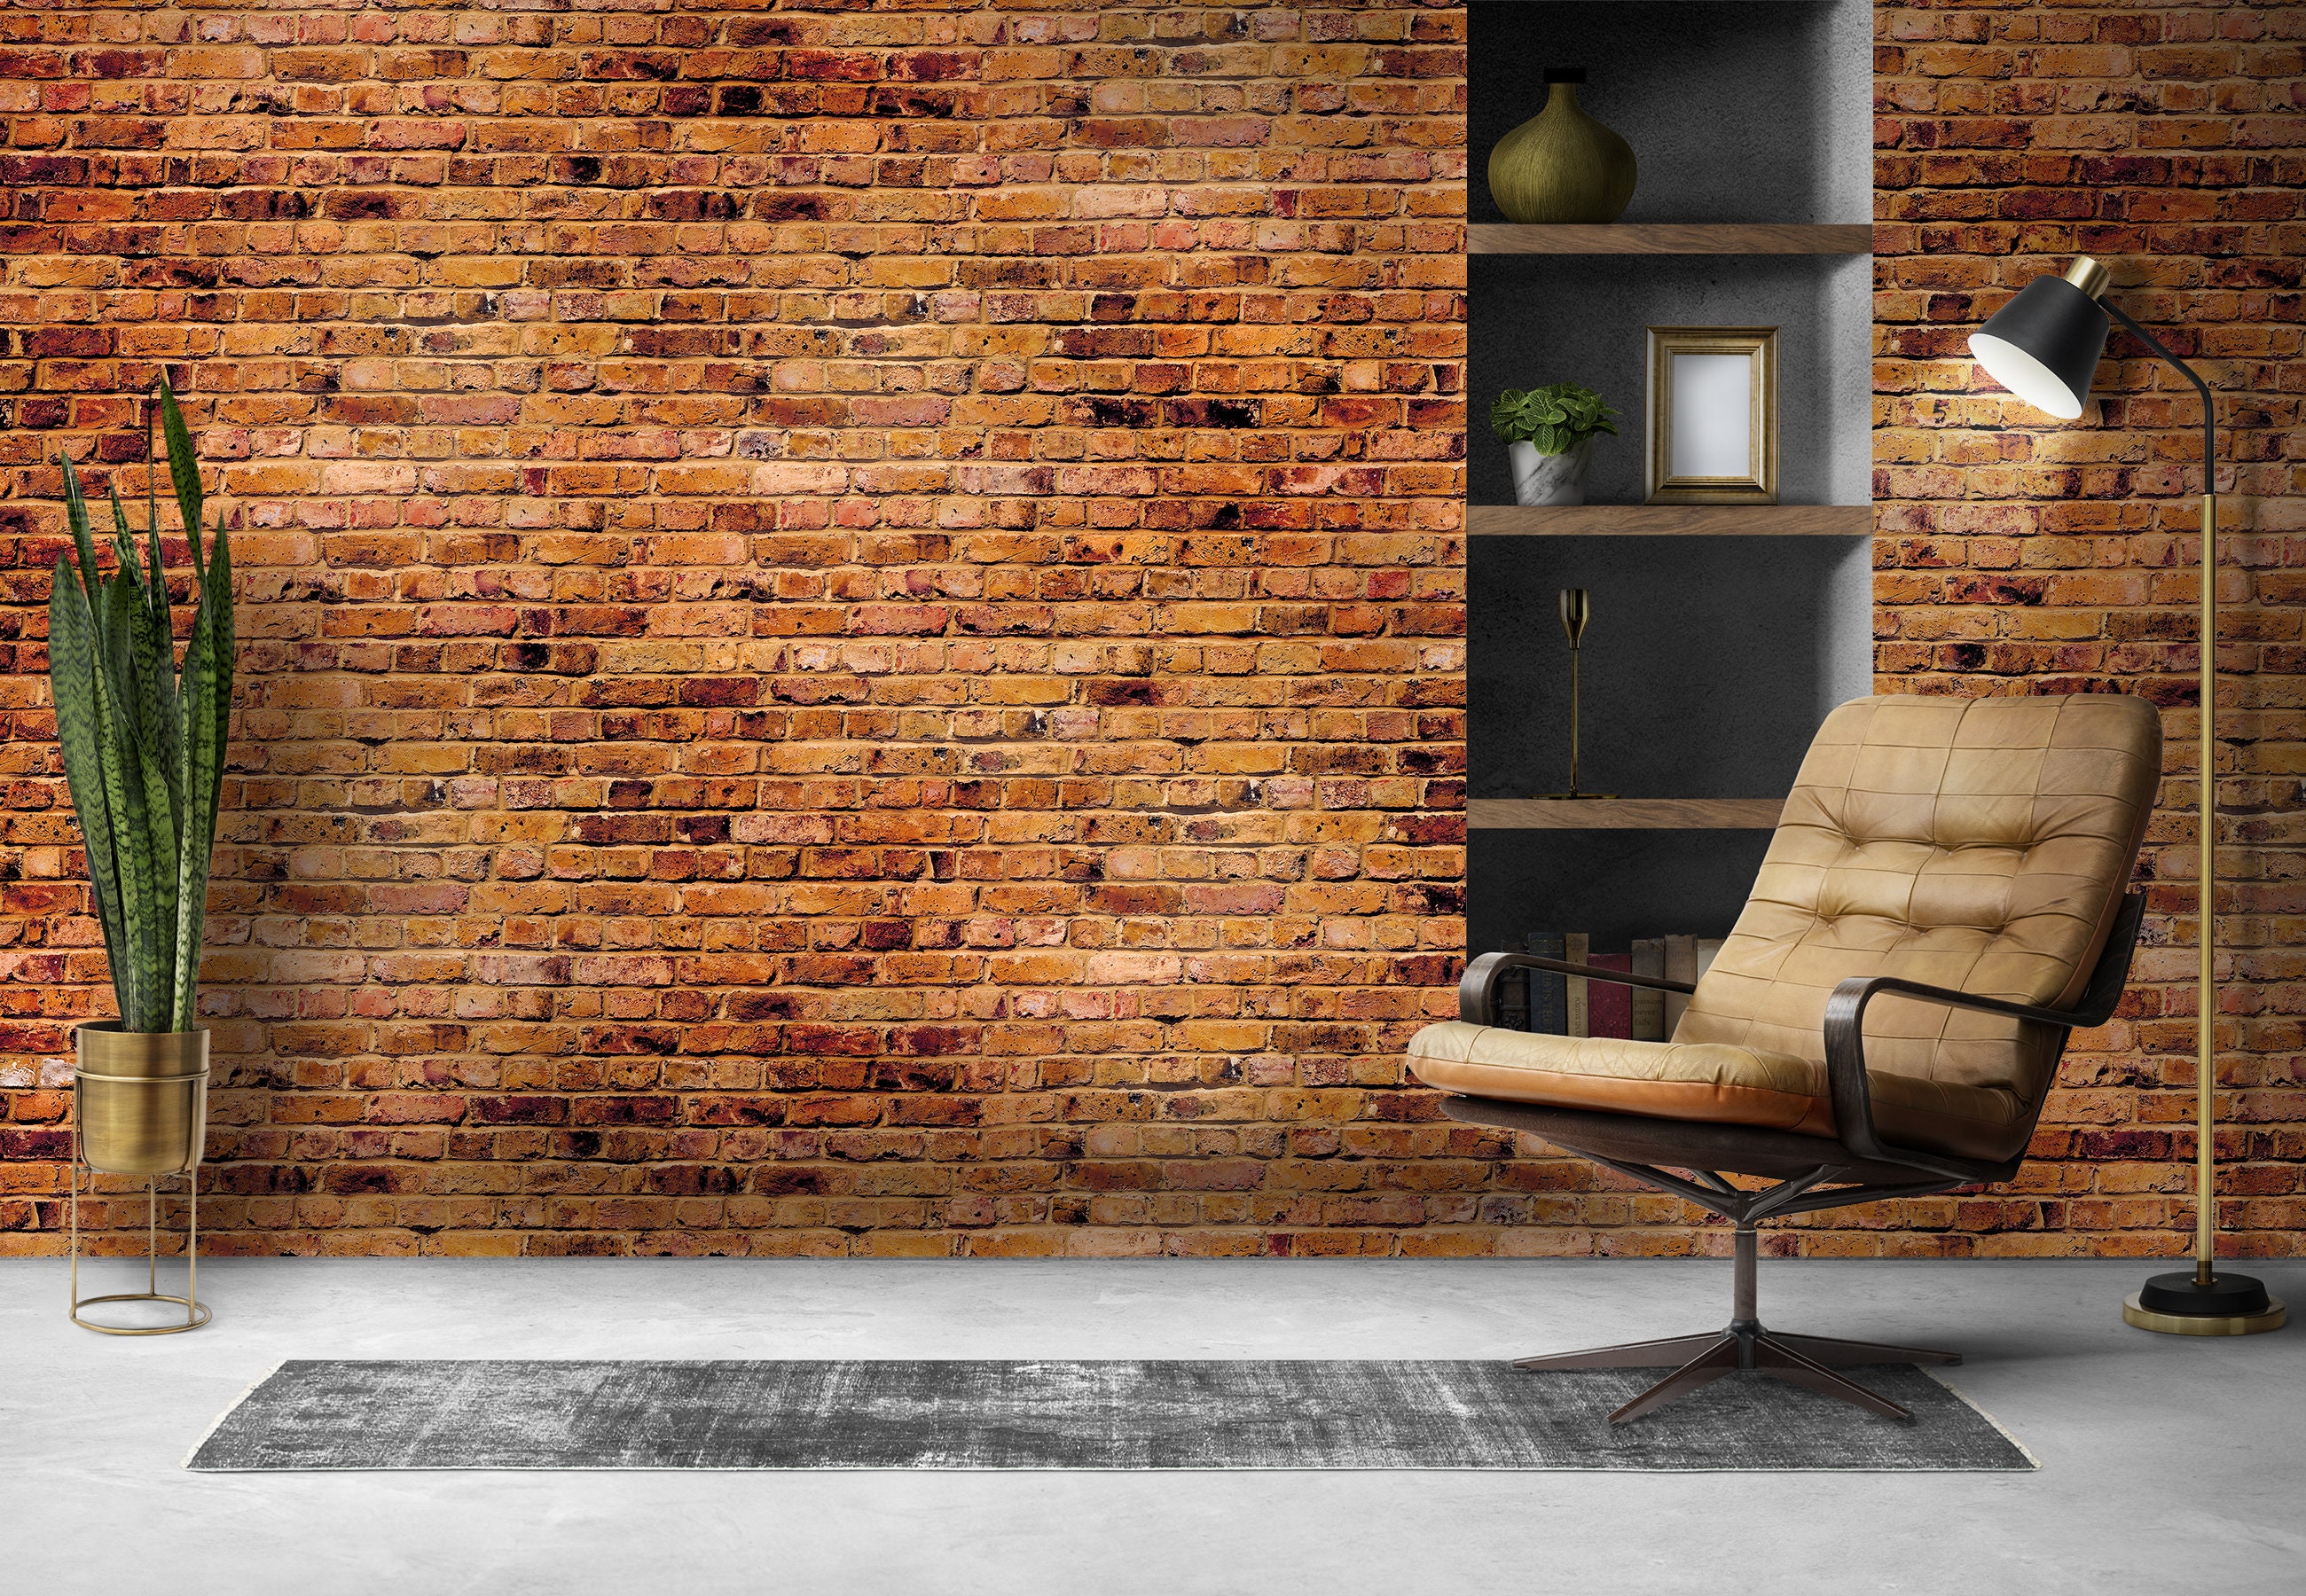 Brick Wallpaper, Removable Wall Mural,loft,industrial, Self Adhesive, Peel  and Stick or Vinyl 